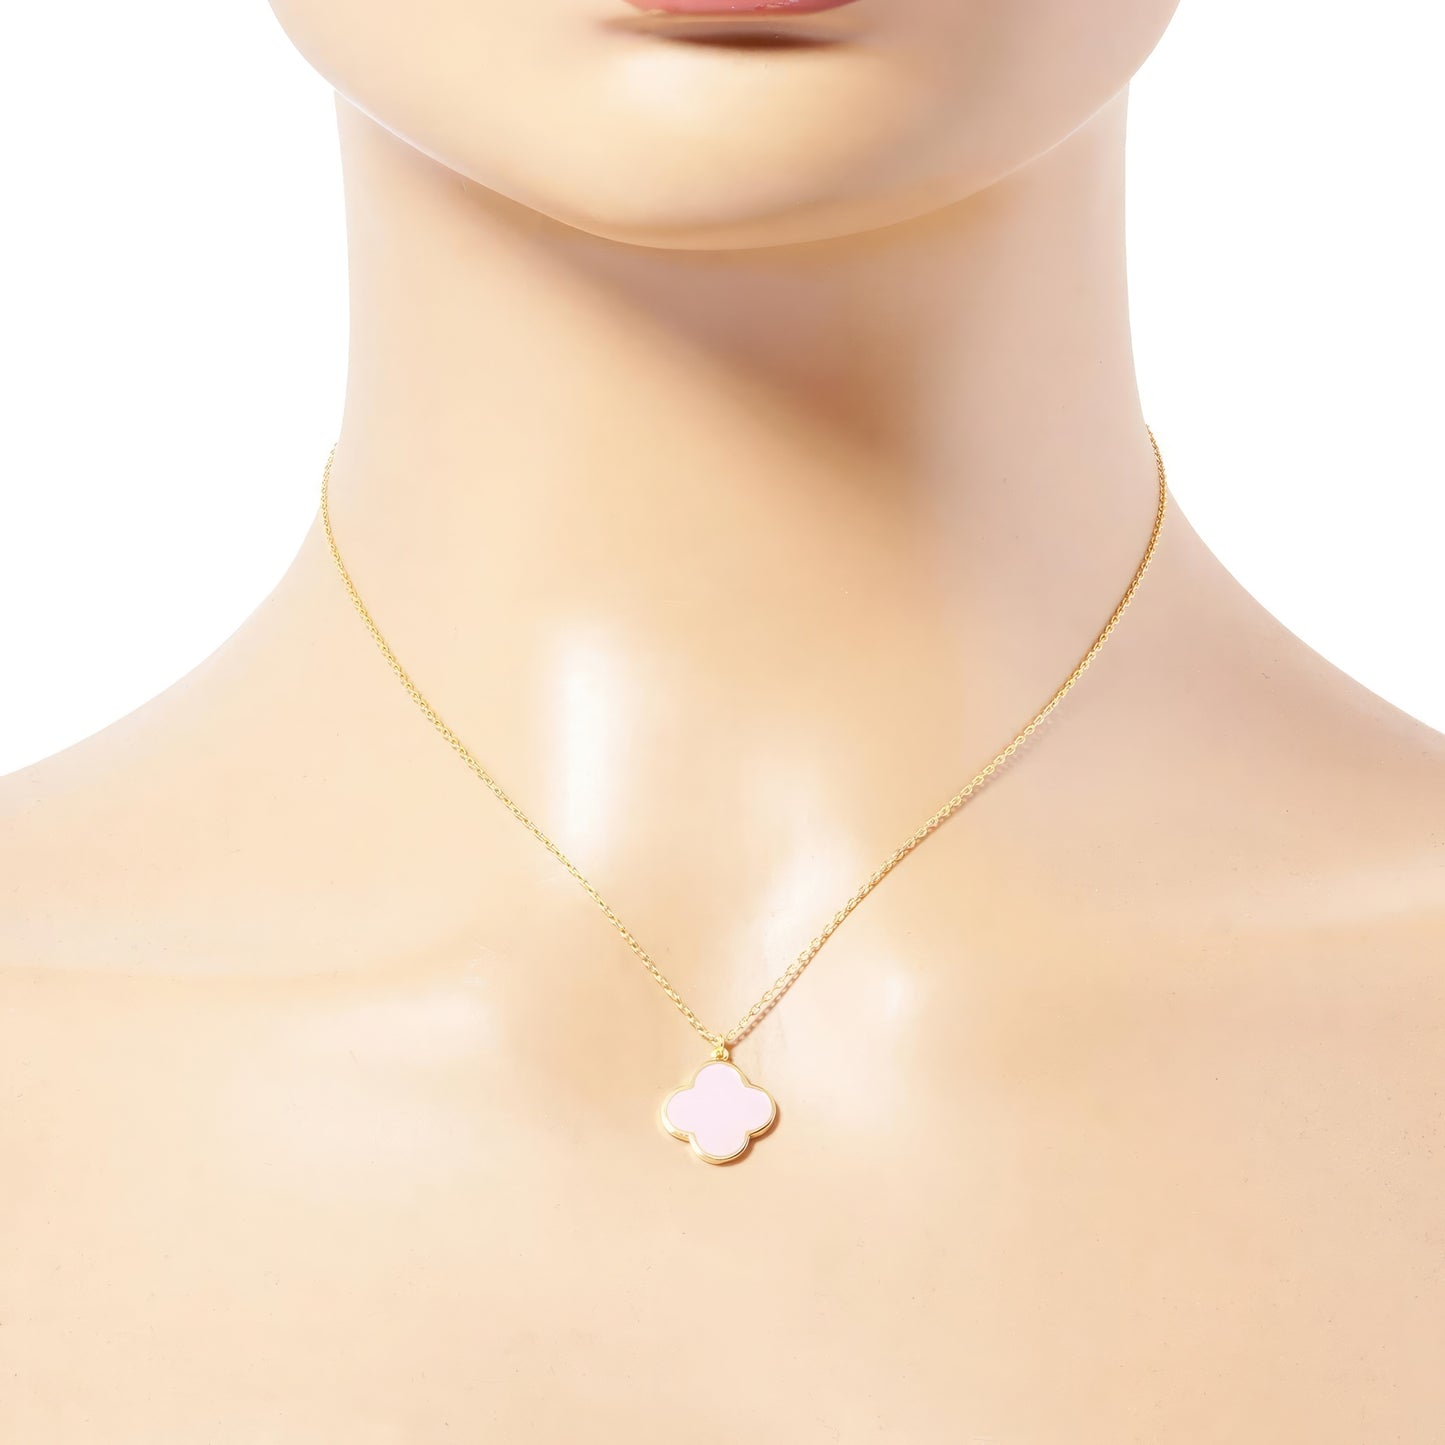 Jewelry-Gold Clover Pendant Necklace